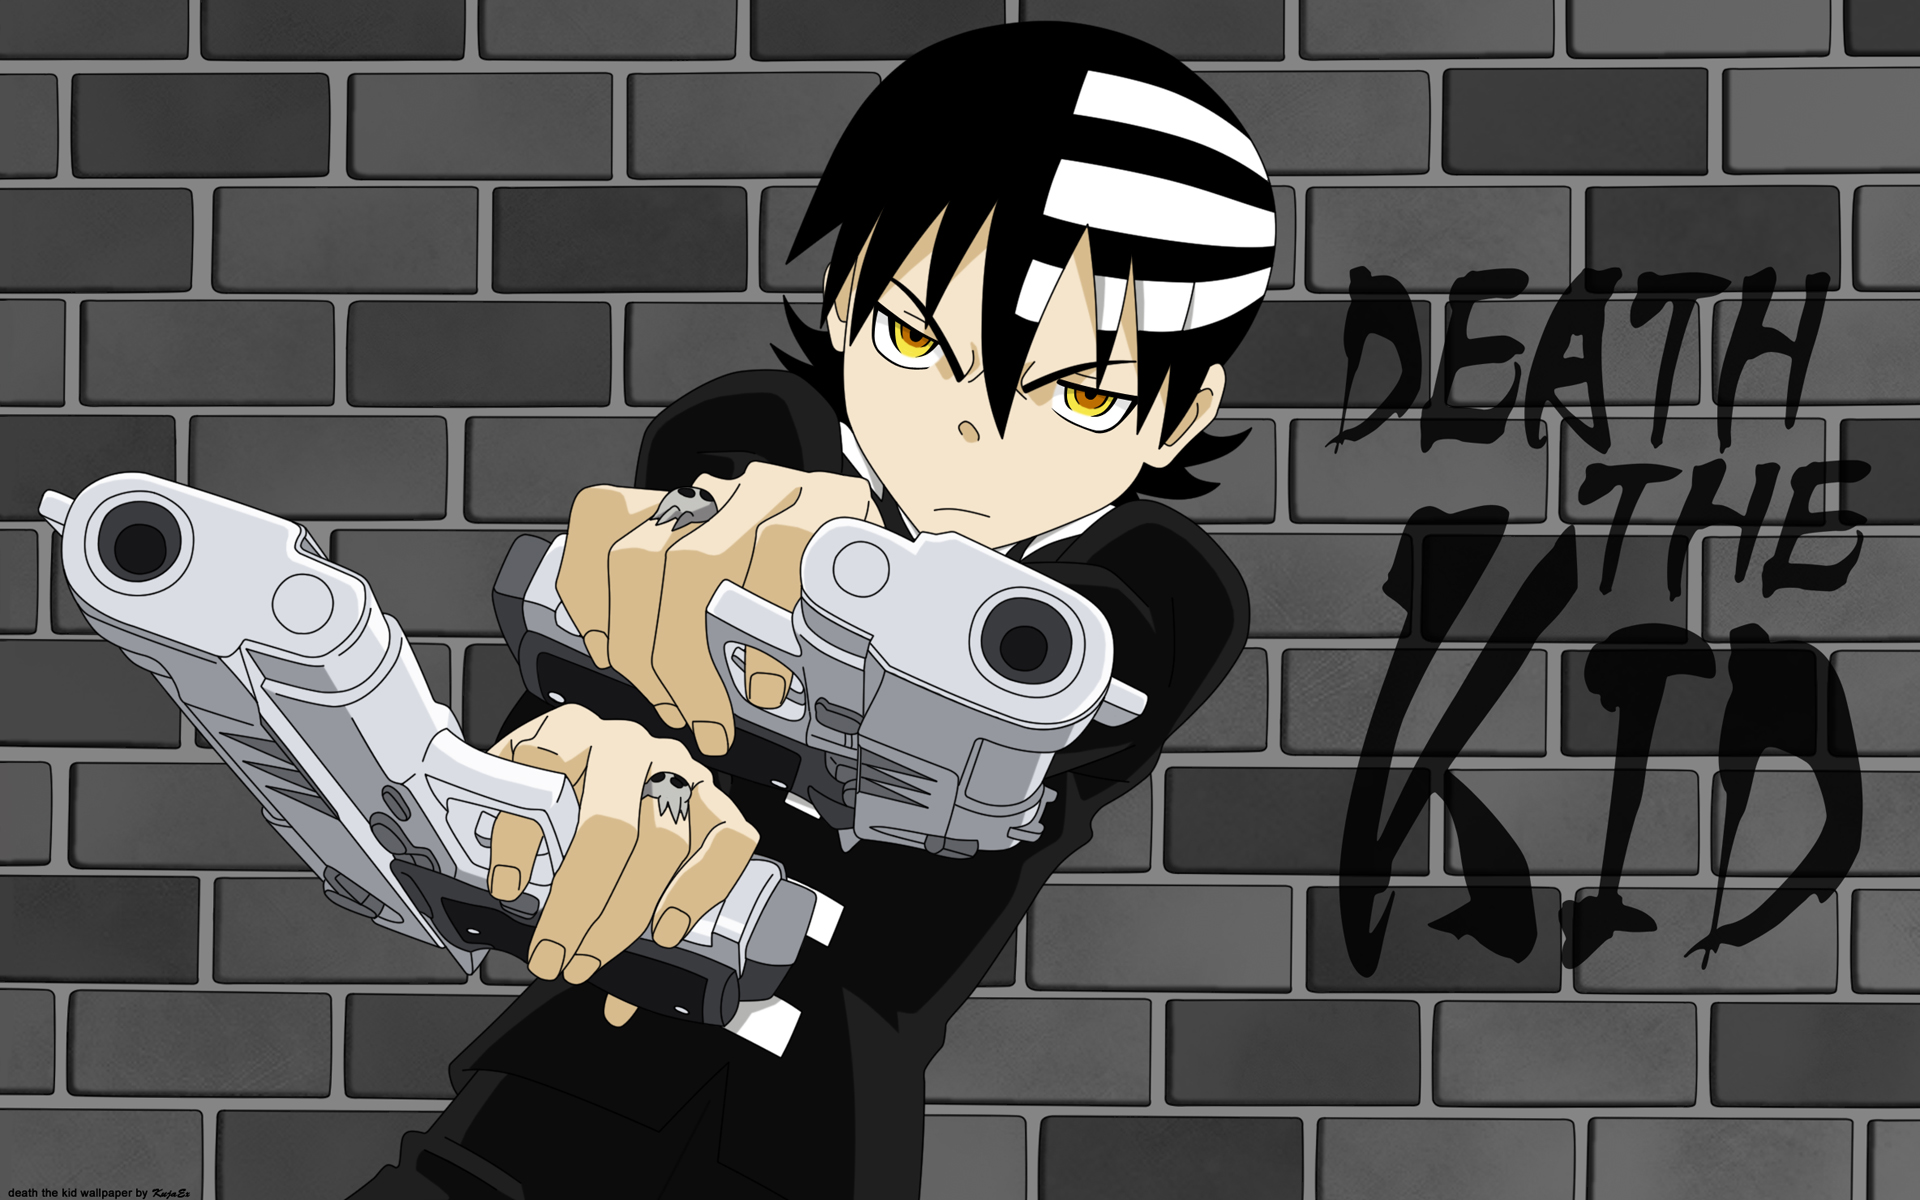 Soul Eater character Death the Kid on a vibrant anime-inspired desktop wallpaper by KujaEx.